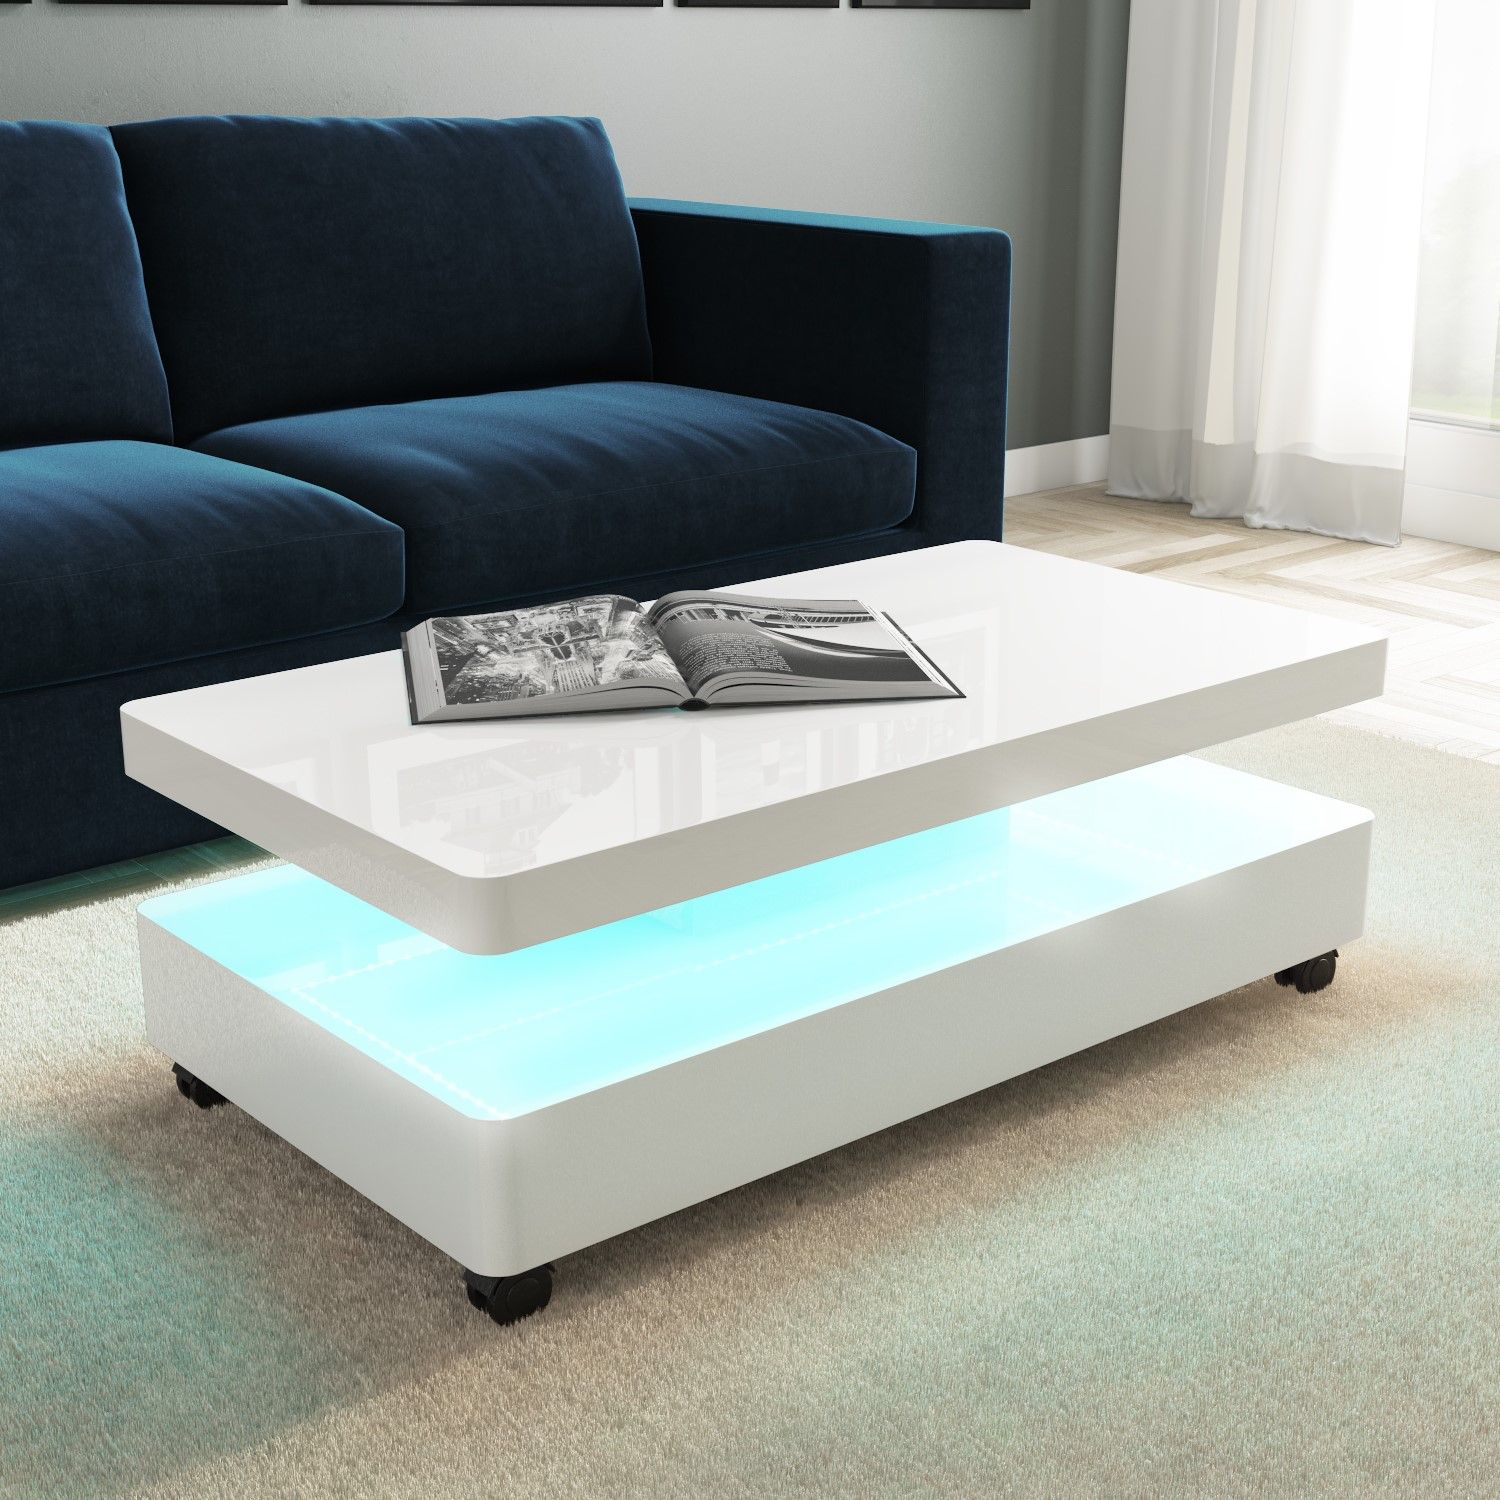 High Gloss White Coffee Table With Led Lighting 5060388562168 | Ebay Inside Rectangular Led Coffee Tables (Gallery 11 of 20)